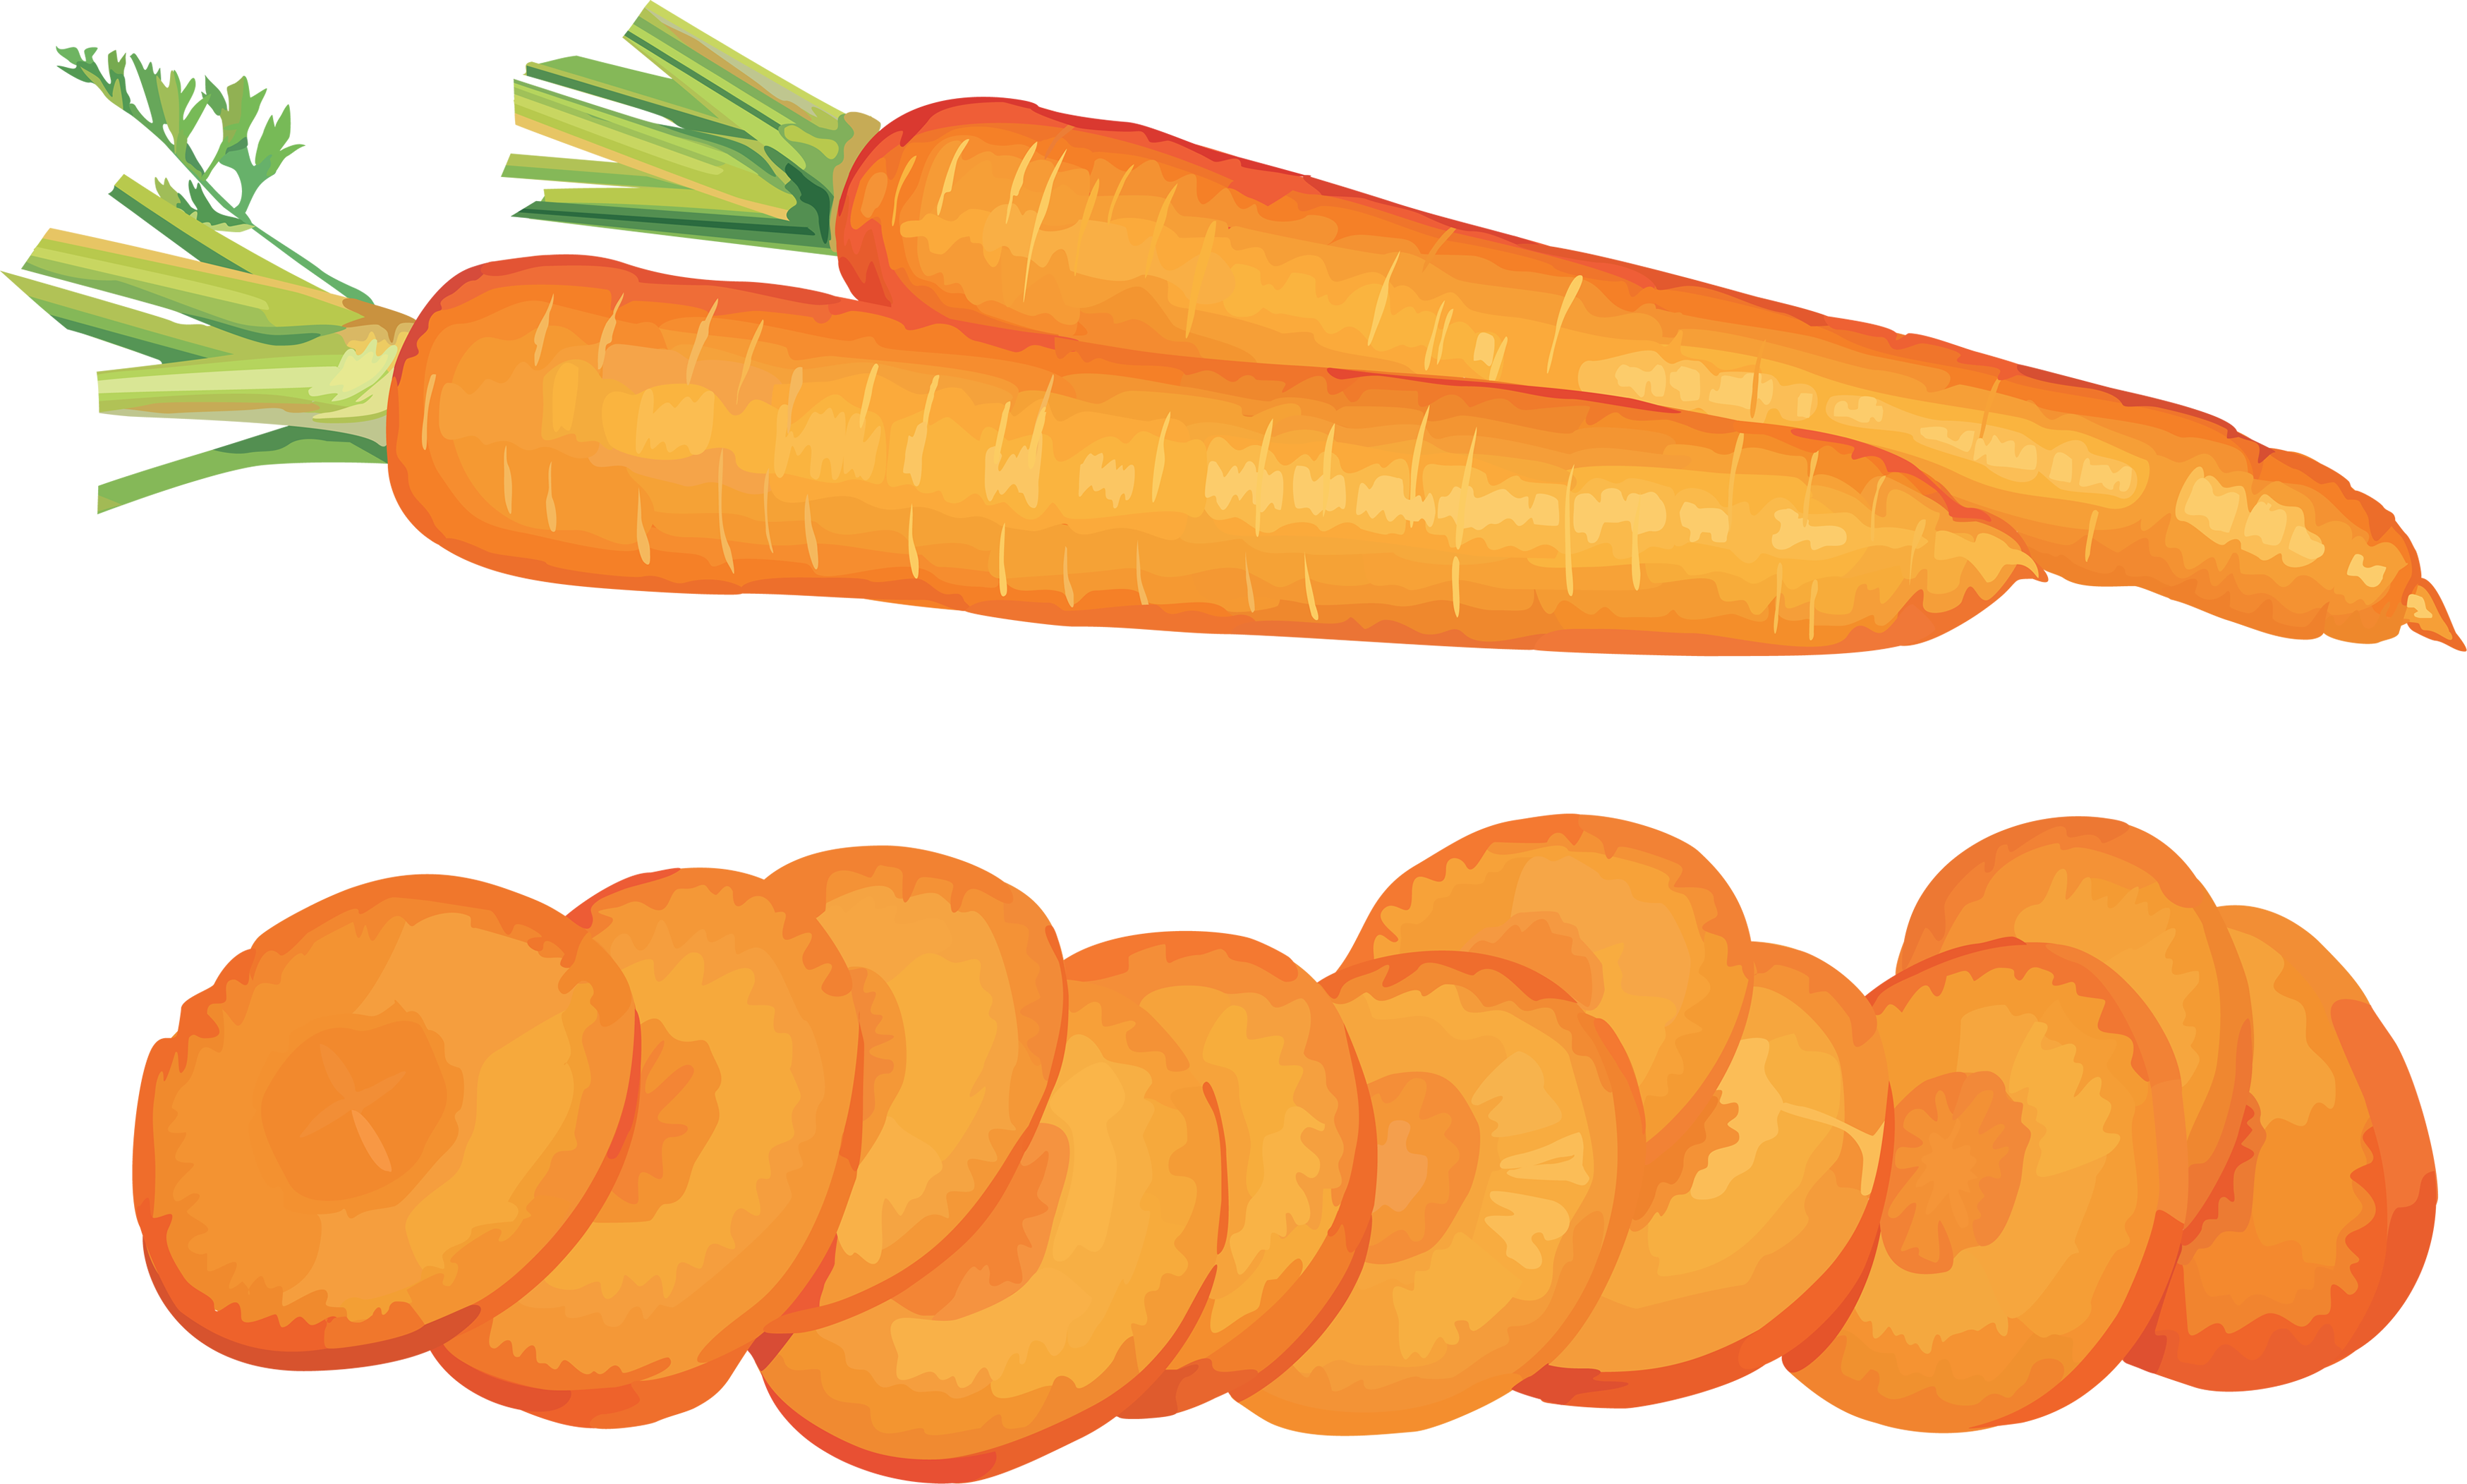 Carrot clipart image